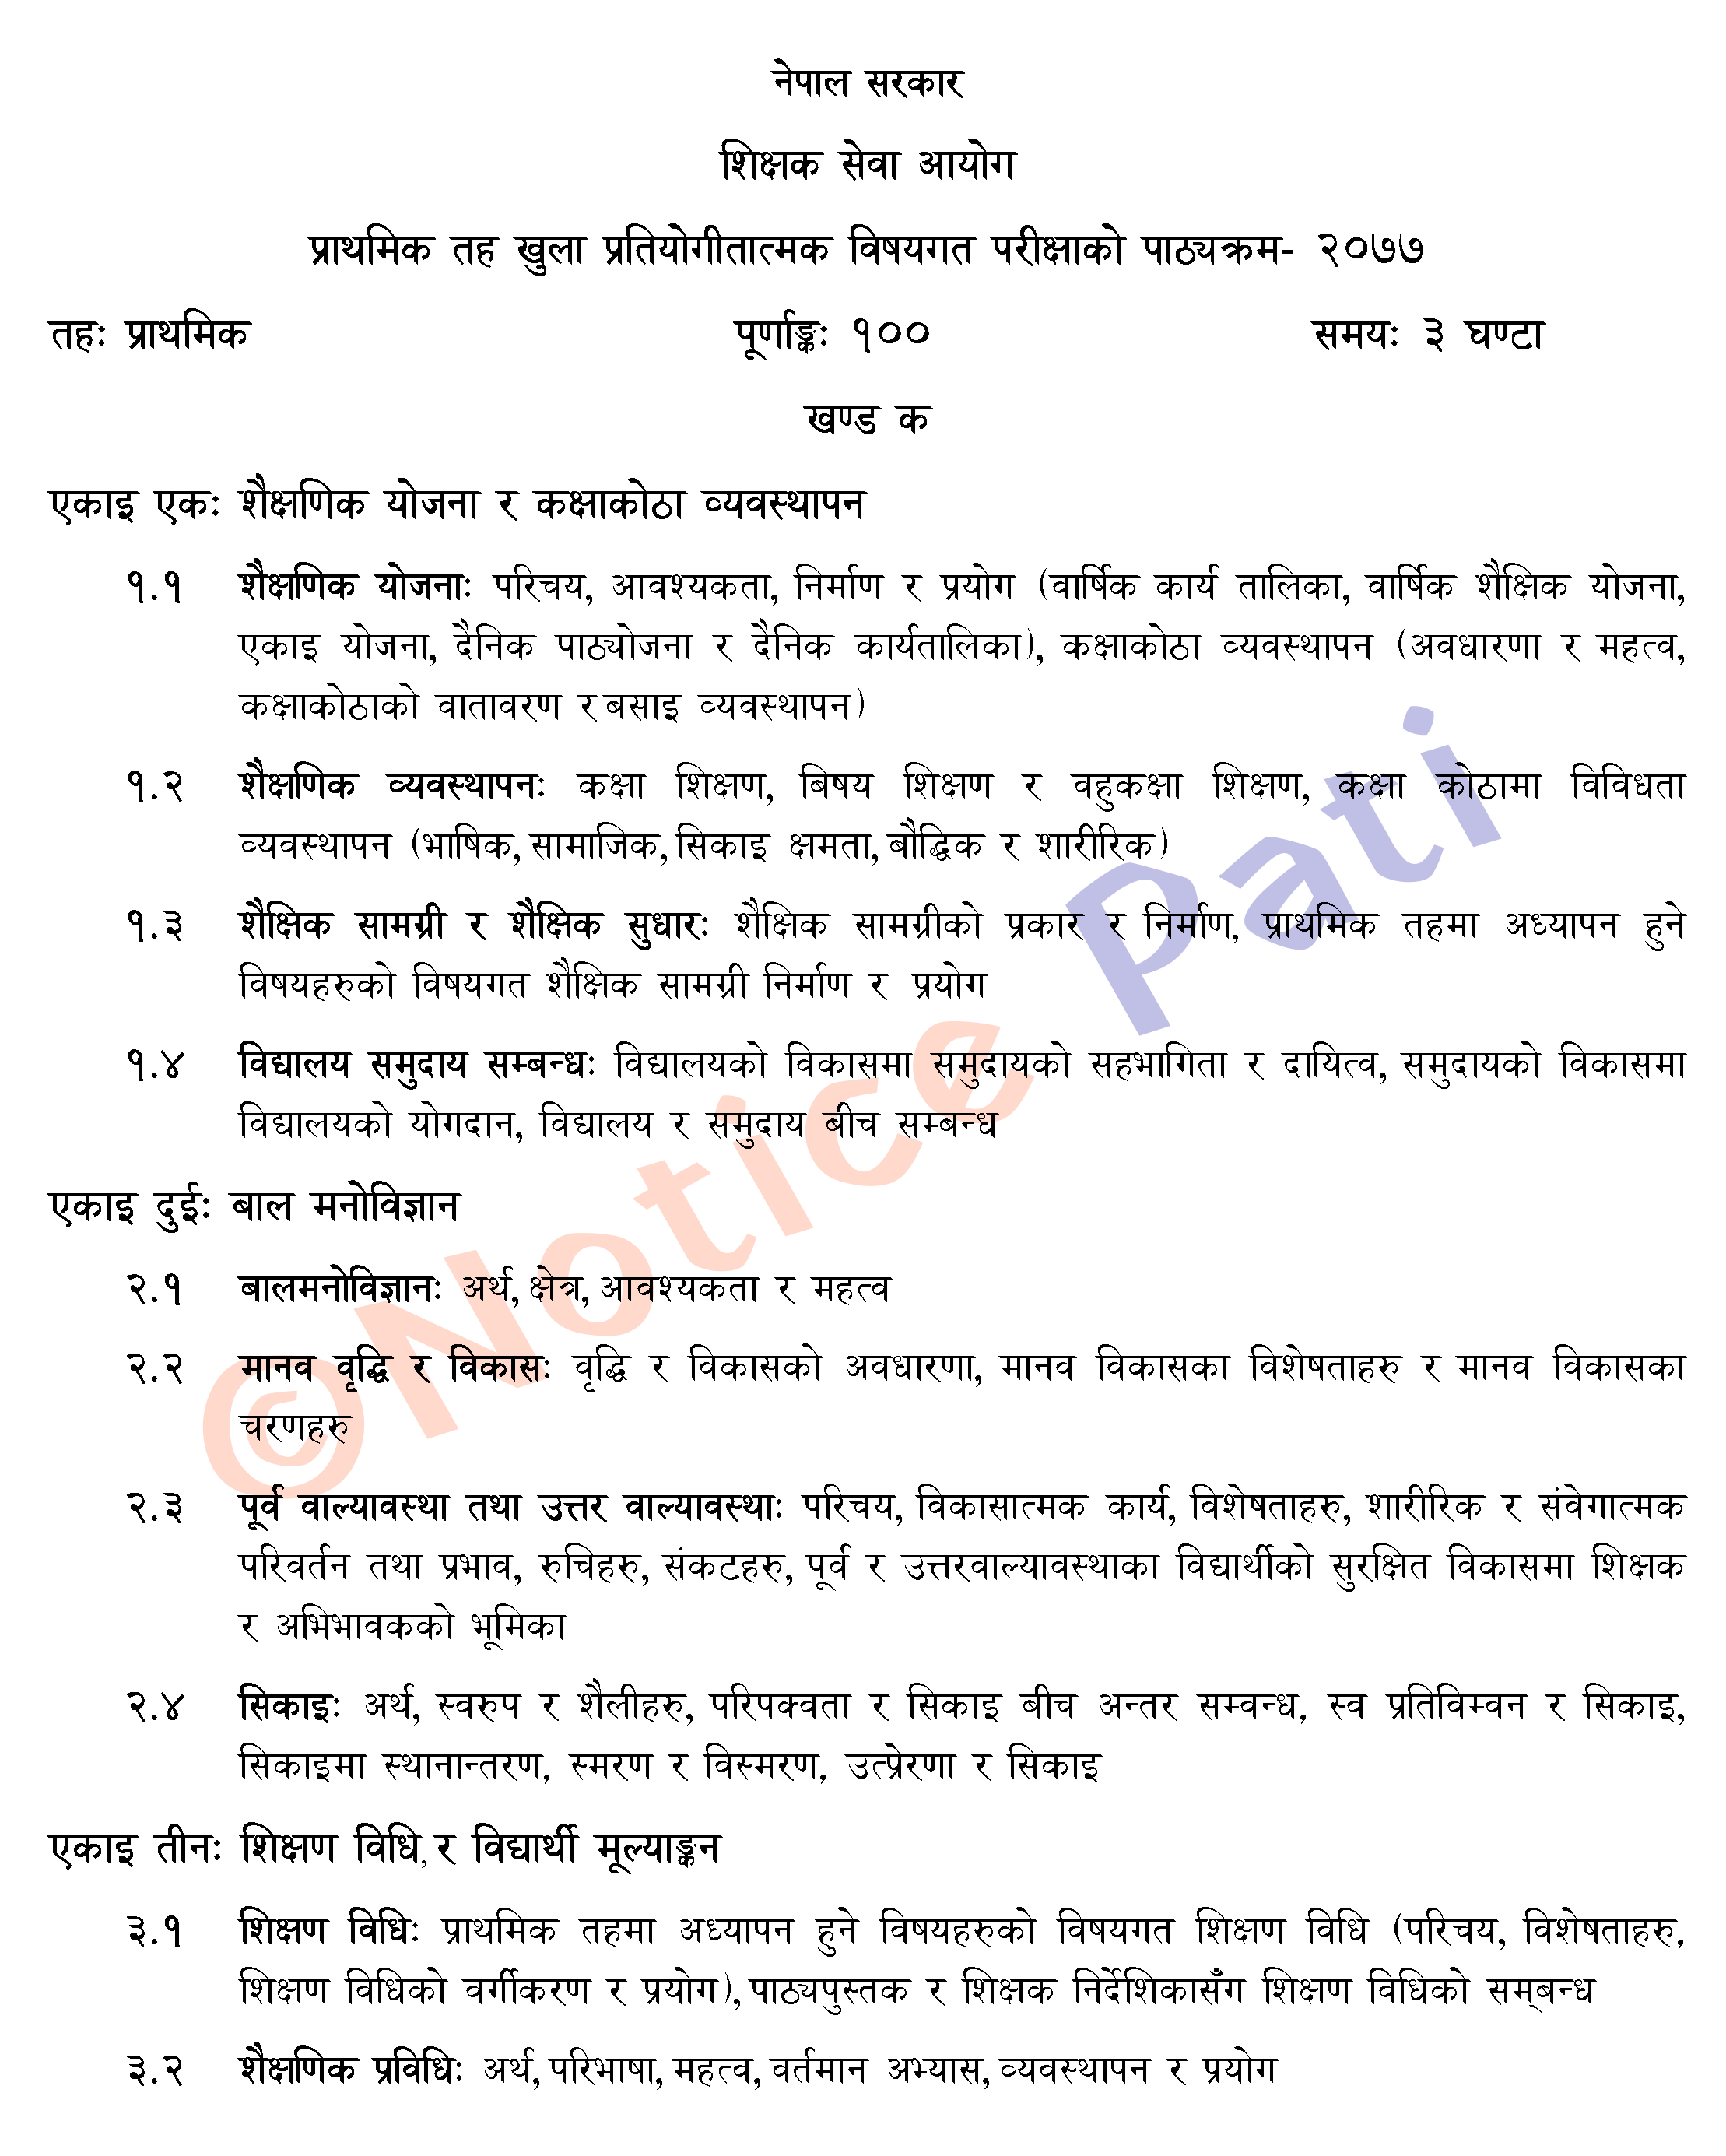 Primary Level Subjective Exam Syllabus This phase includes the subjective question.